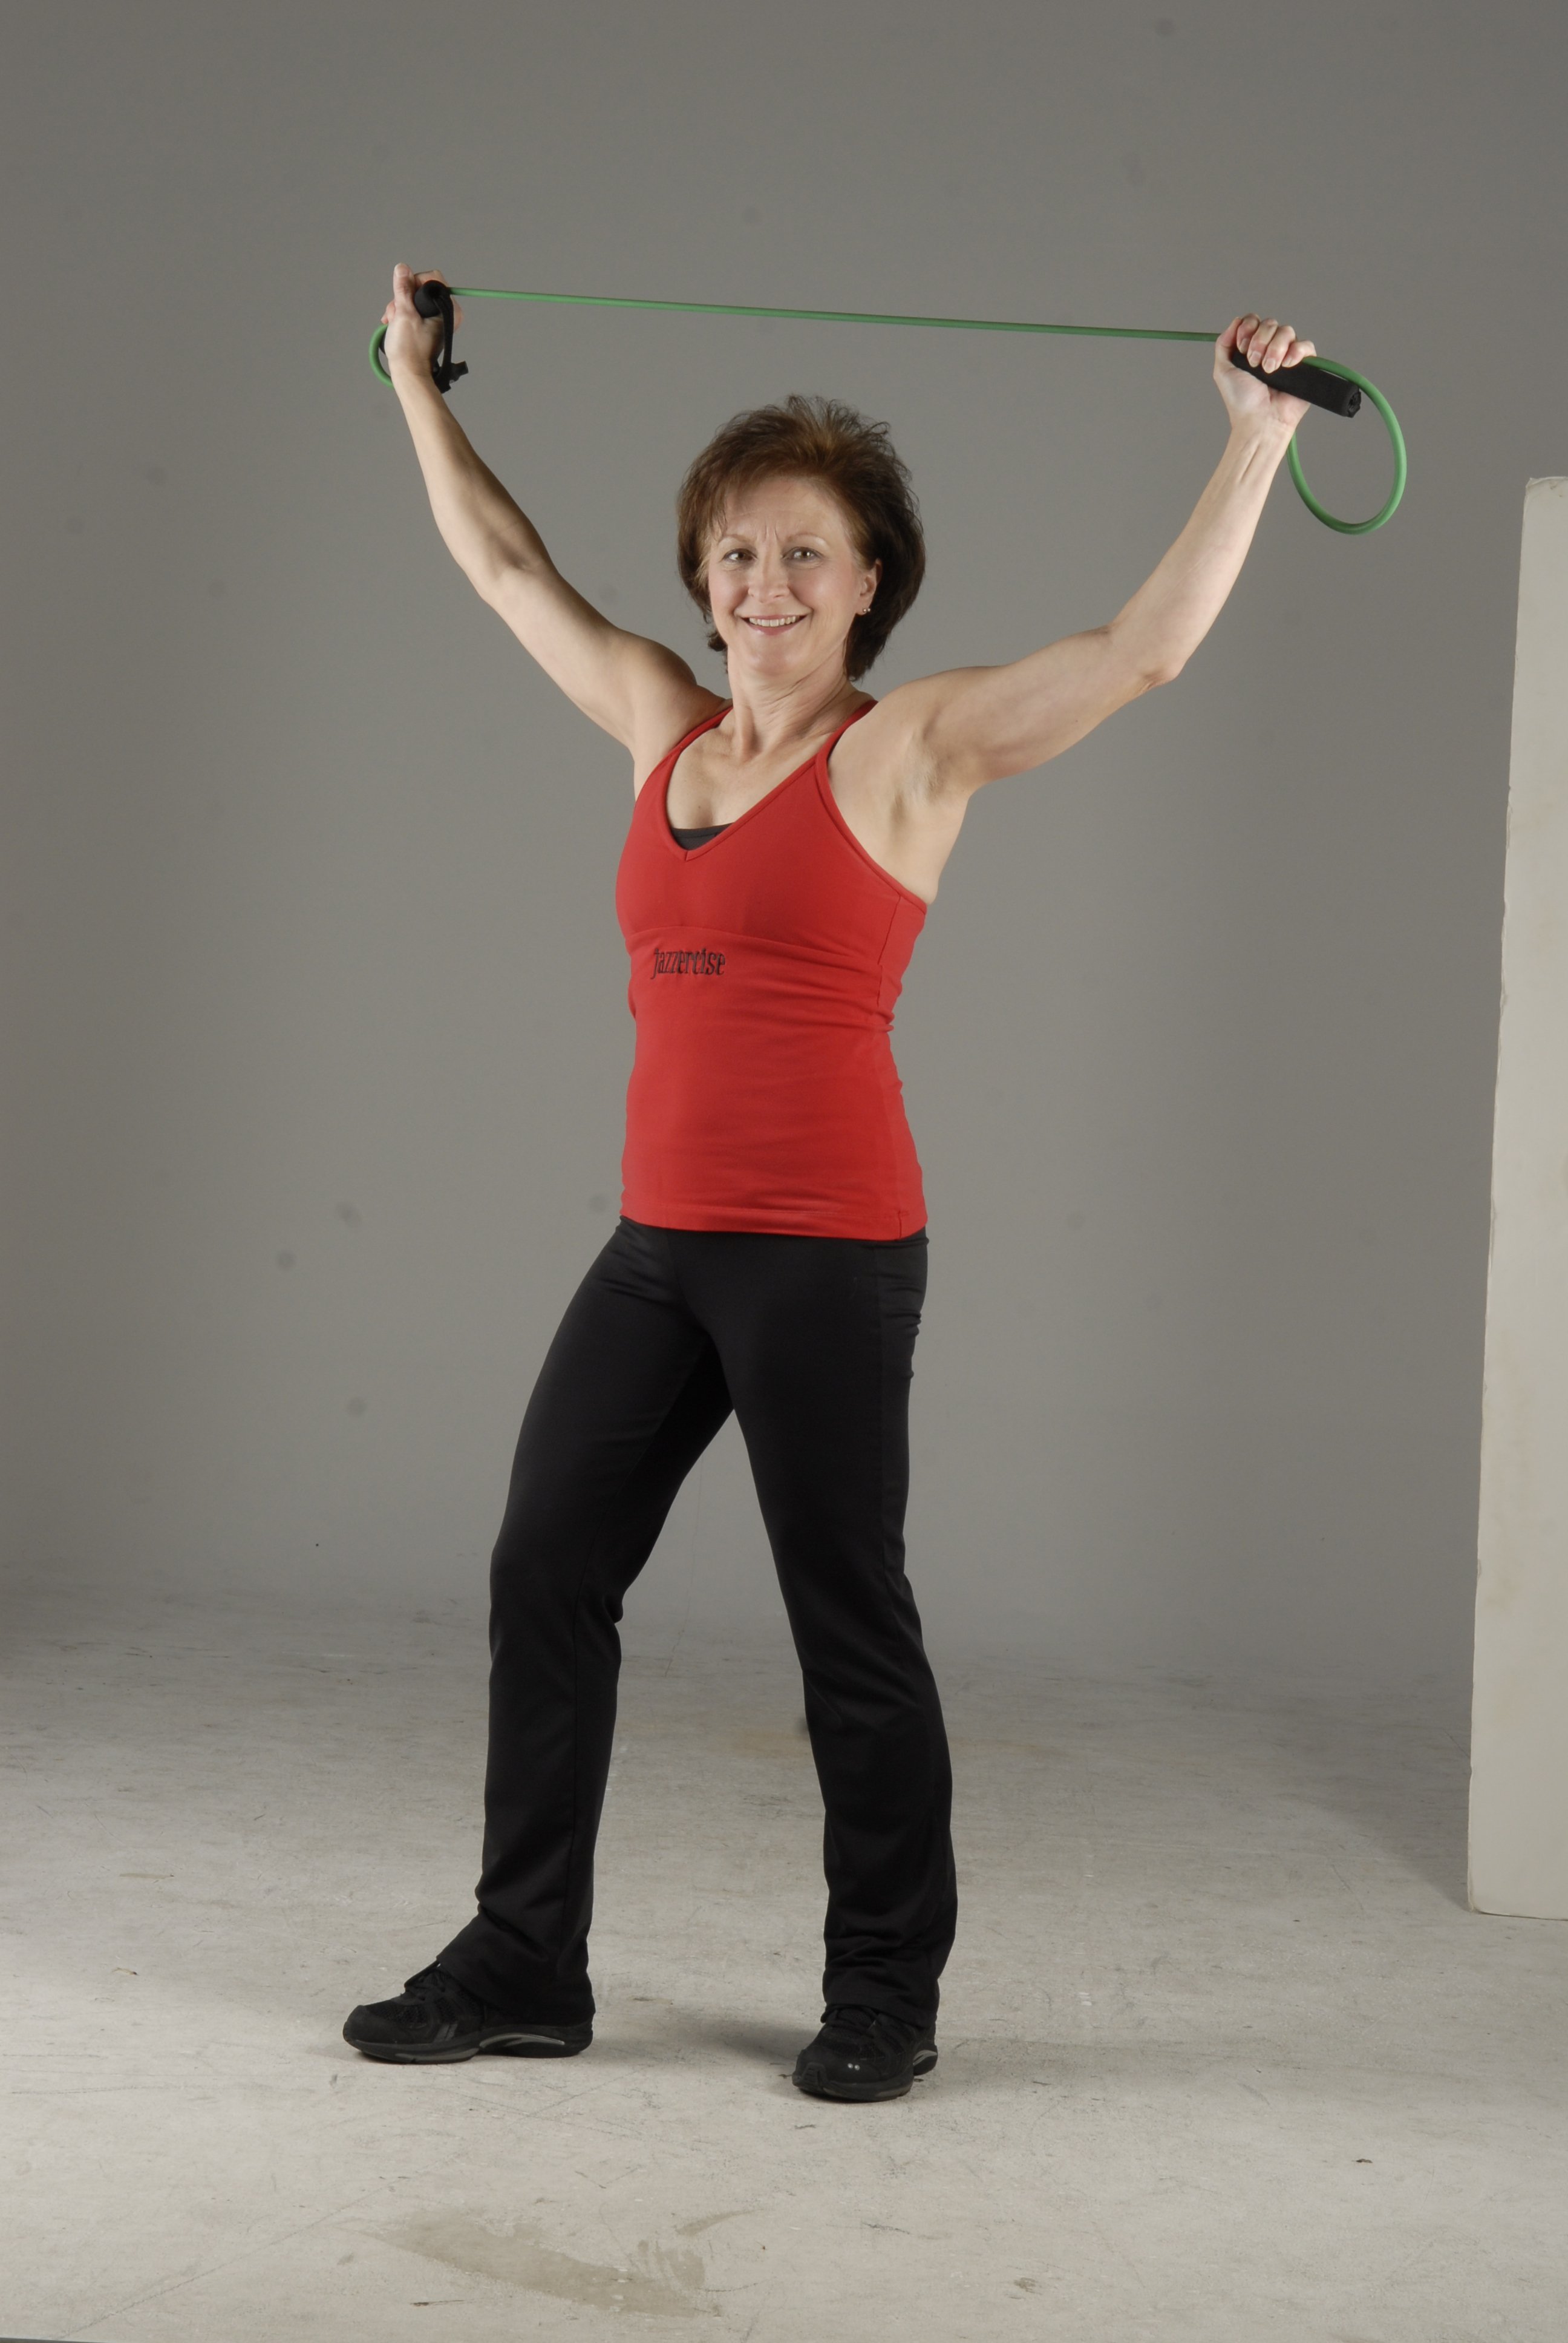 Instructor Cathie Wallace heralds comeback of Jazzercise classes